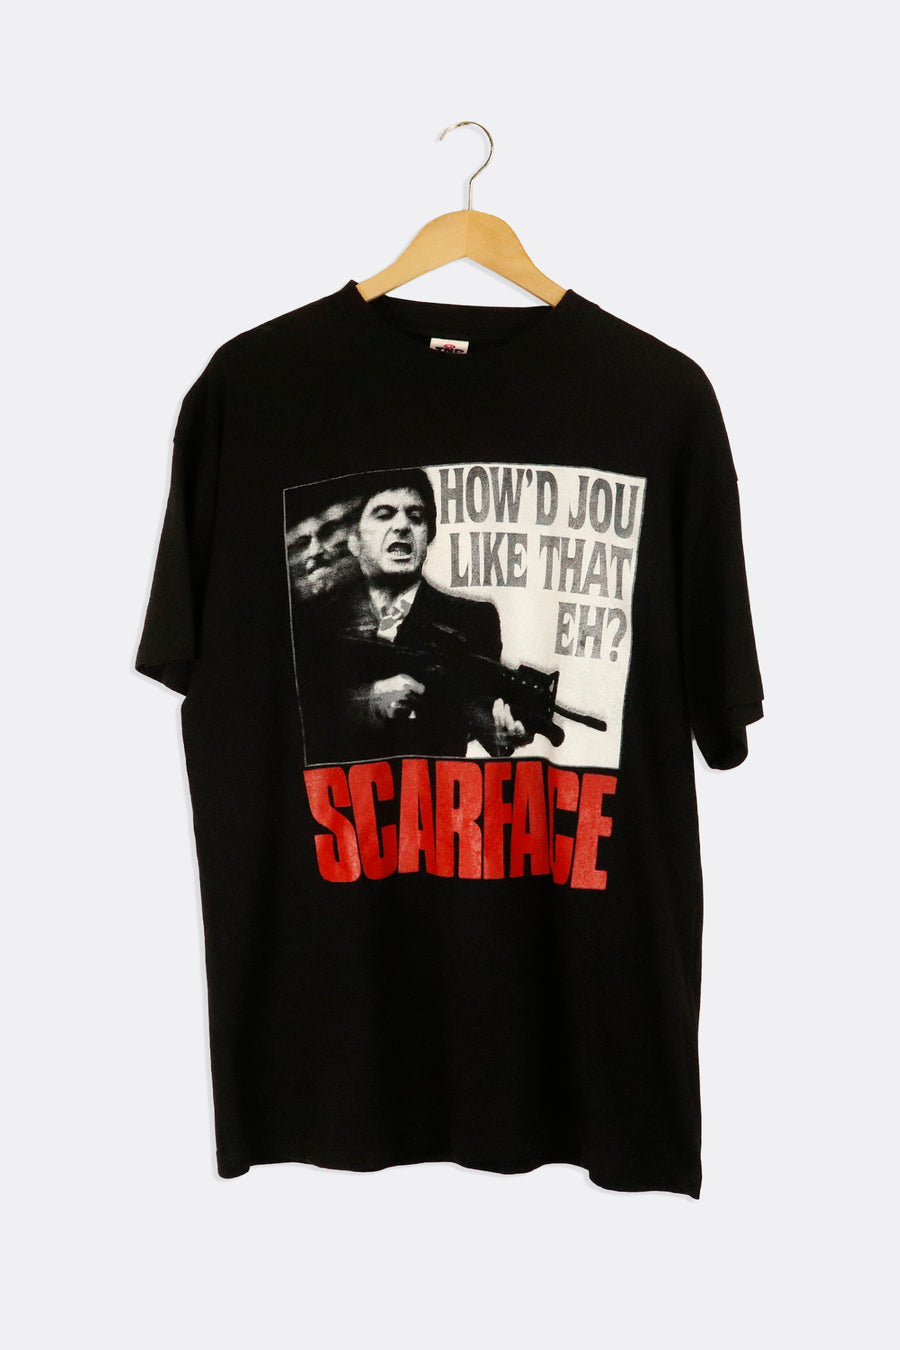 Vintage Scarface How Do You Like That EH Graphic T Shirt Sz L